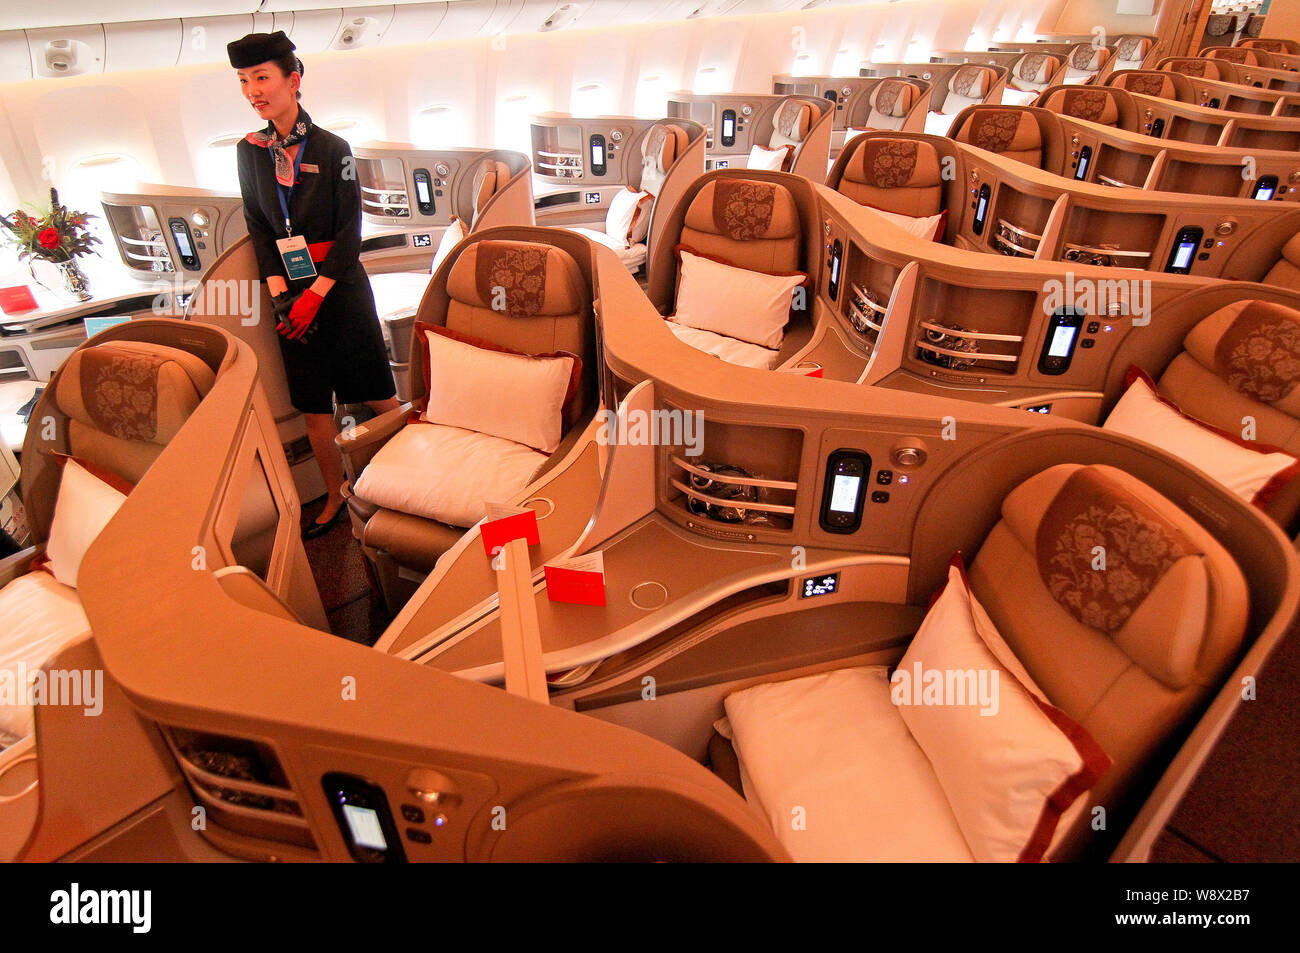 A Flight Attendant Poses In A Business Class Cabin Of A Boeing 777